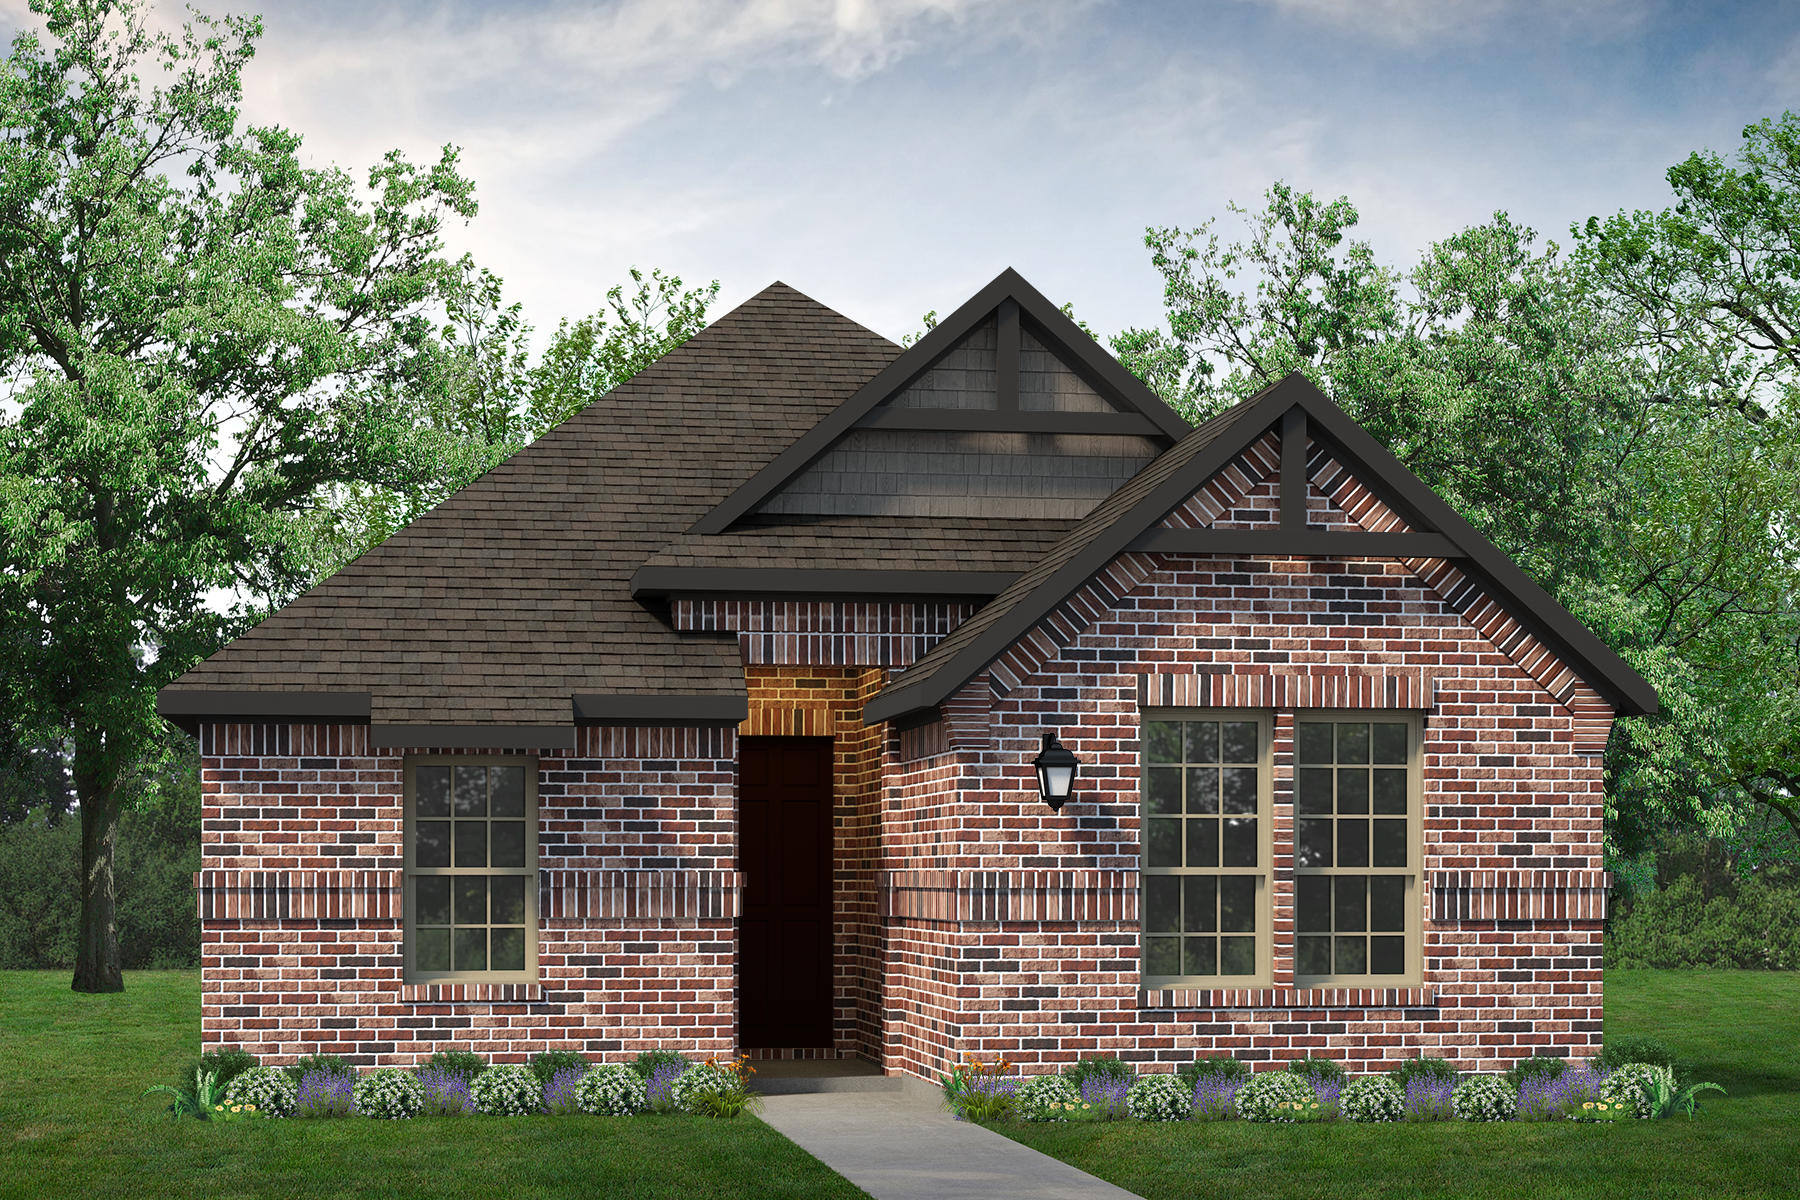 A rendering of a Belton brick home with a front porch.